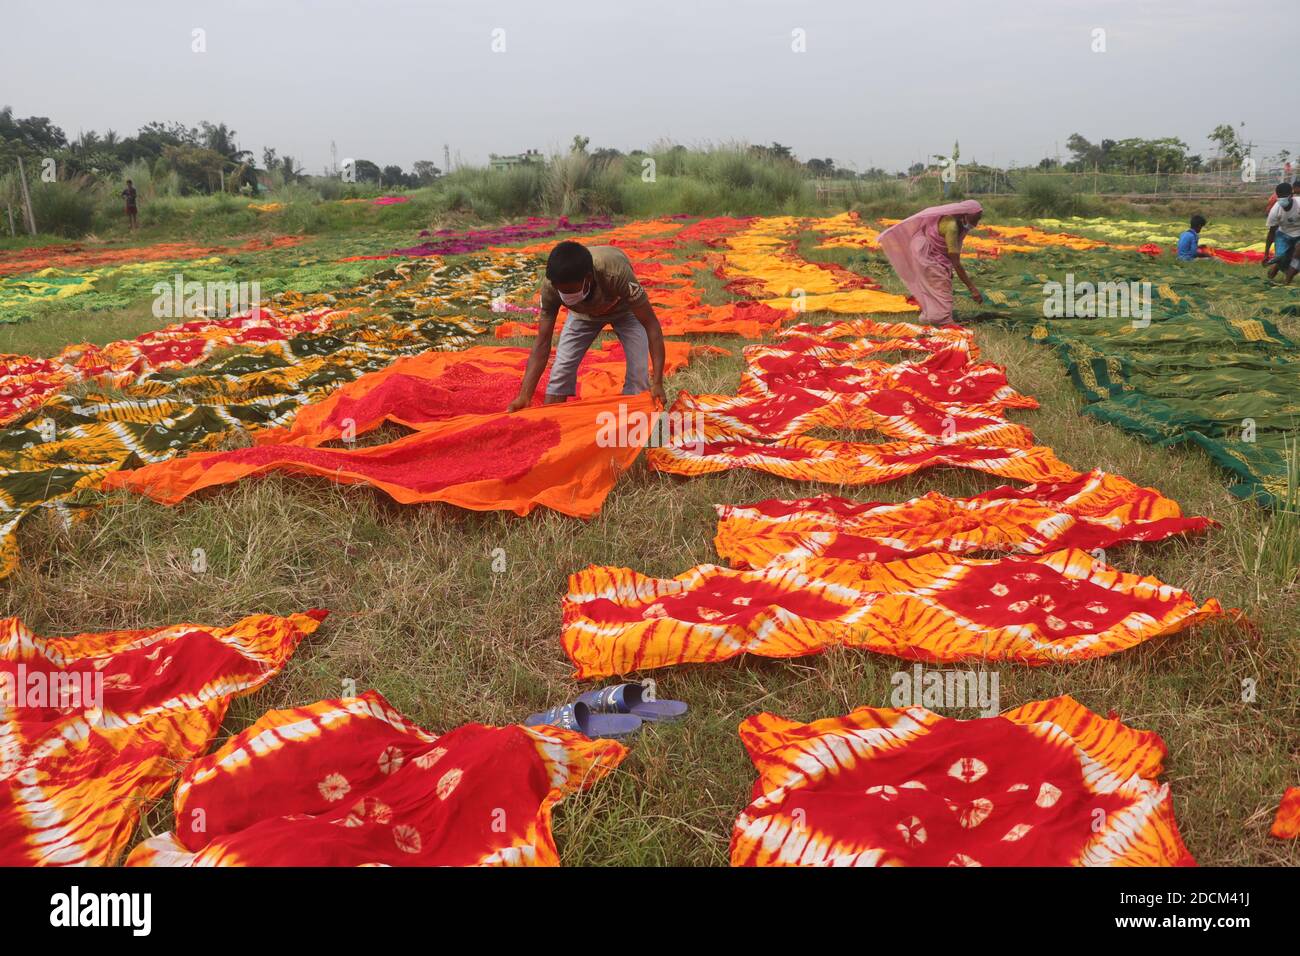 Bangladeshi workers collect fabric after dry them under the sun at a dyeing factory in Narayanganj, near Dhaka, Bangladesh, Nazmul Islam/alamay.com Stock Photo